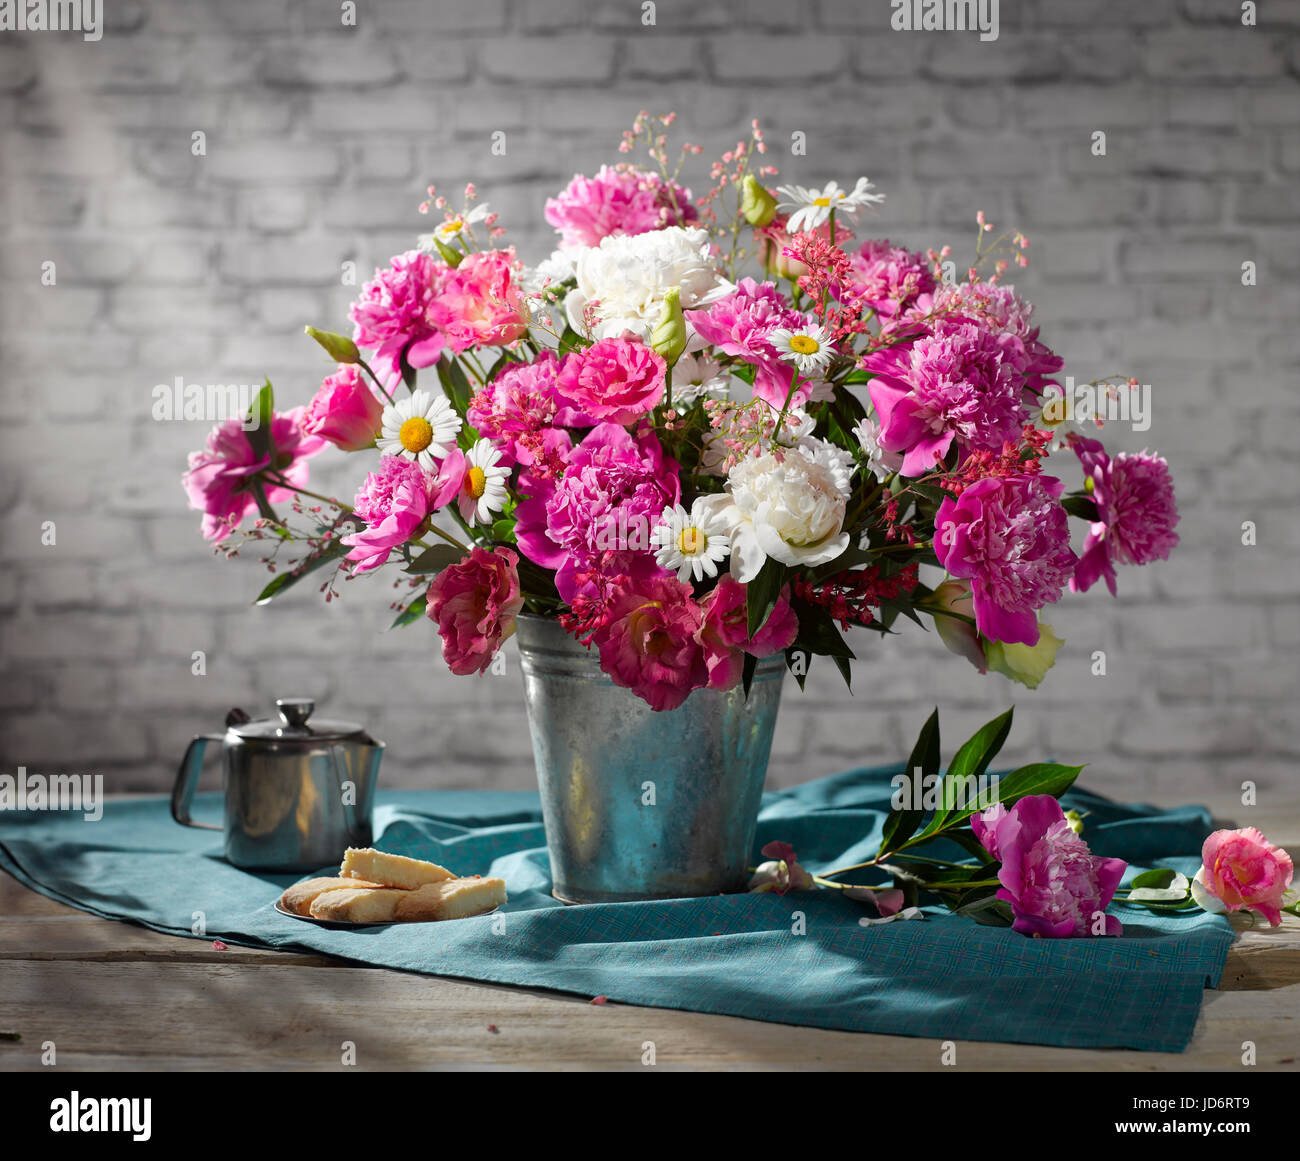 Bouquet of flowers with peonies. Stock Photo